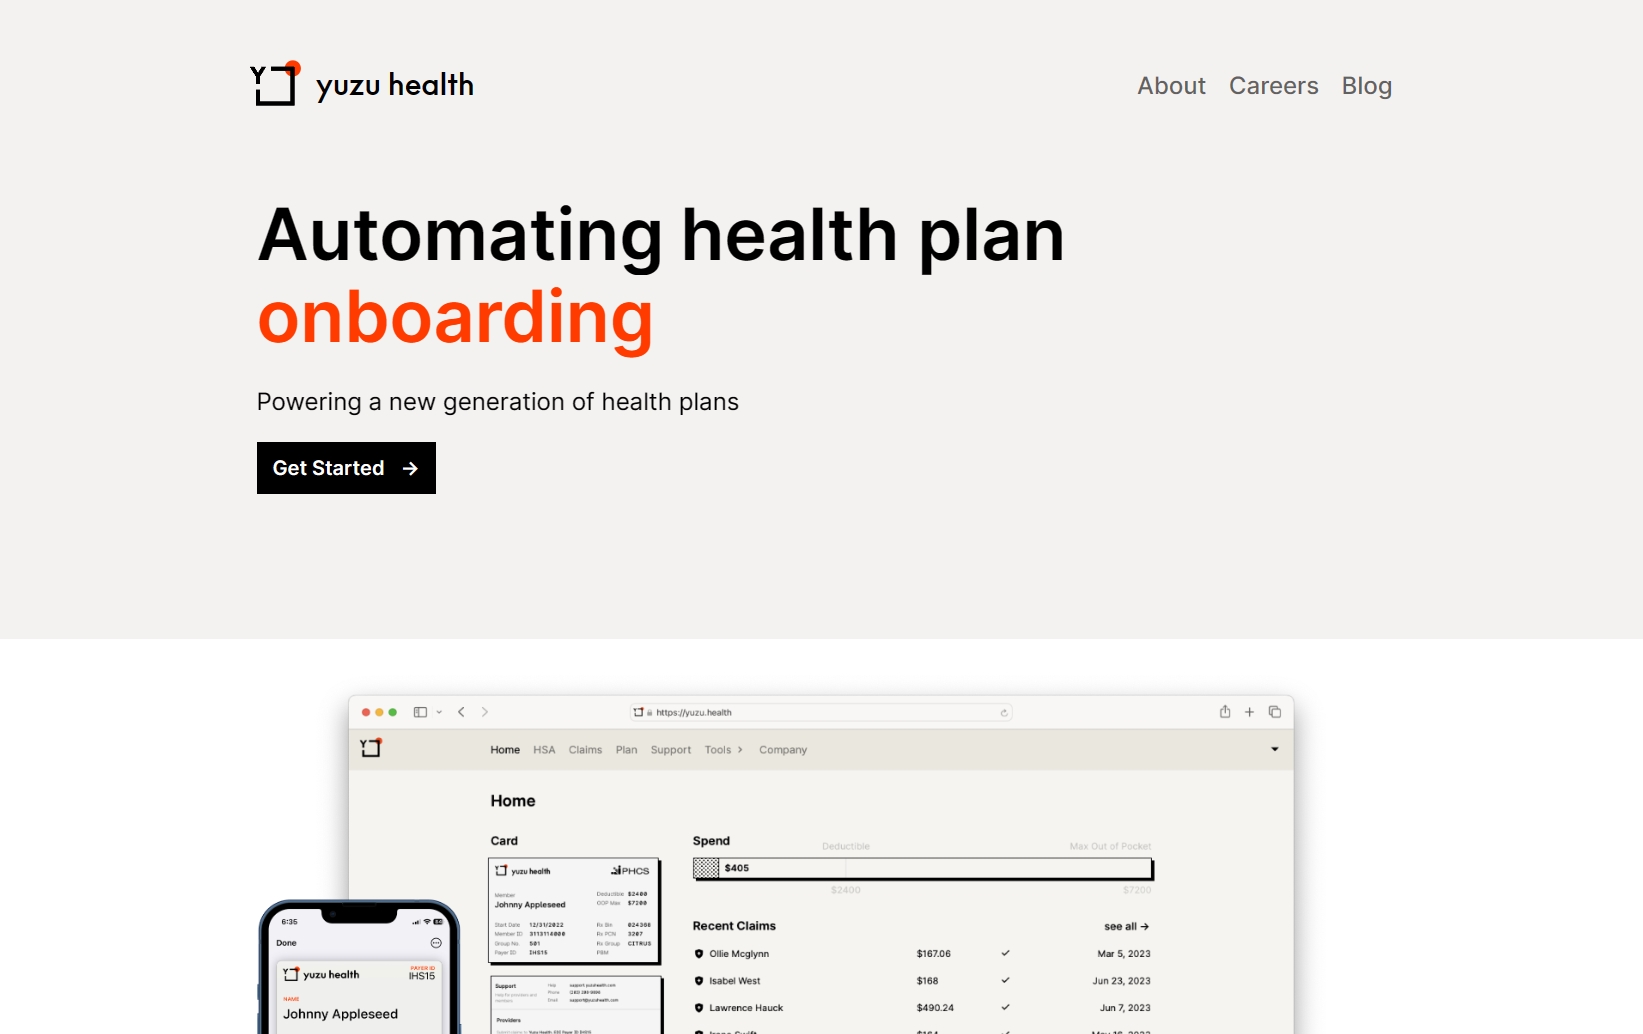 Yuzu Introduces Customizable And Affordable Health Plans For Small Businesses